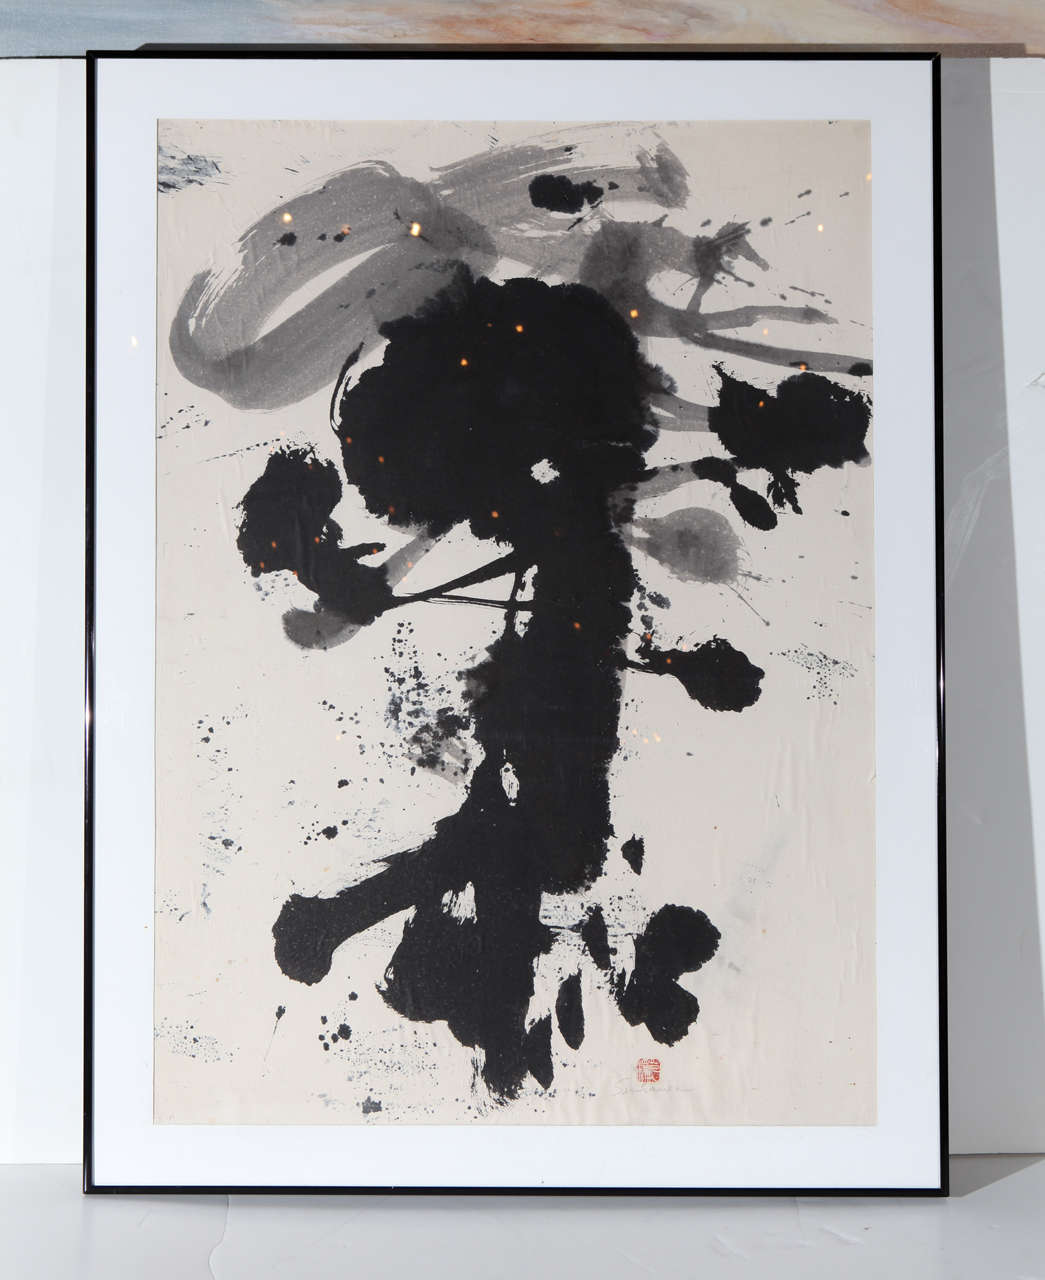 Original, signed and dated, Sumi ink-on-rice-paper drawing by listed Japanese-American artist, Sueo Sarisawa (1910-2004). “Idlwylld Pine”, 1972.